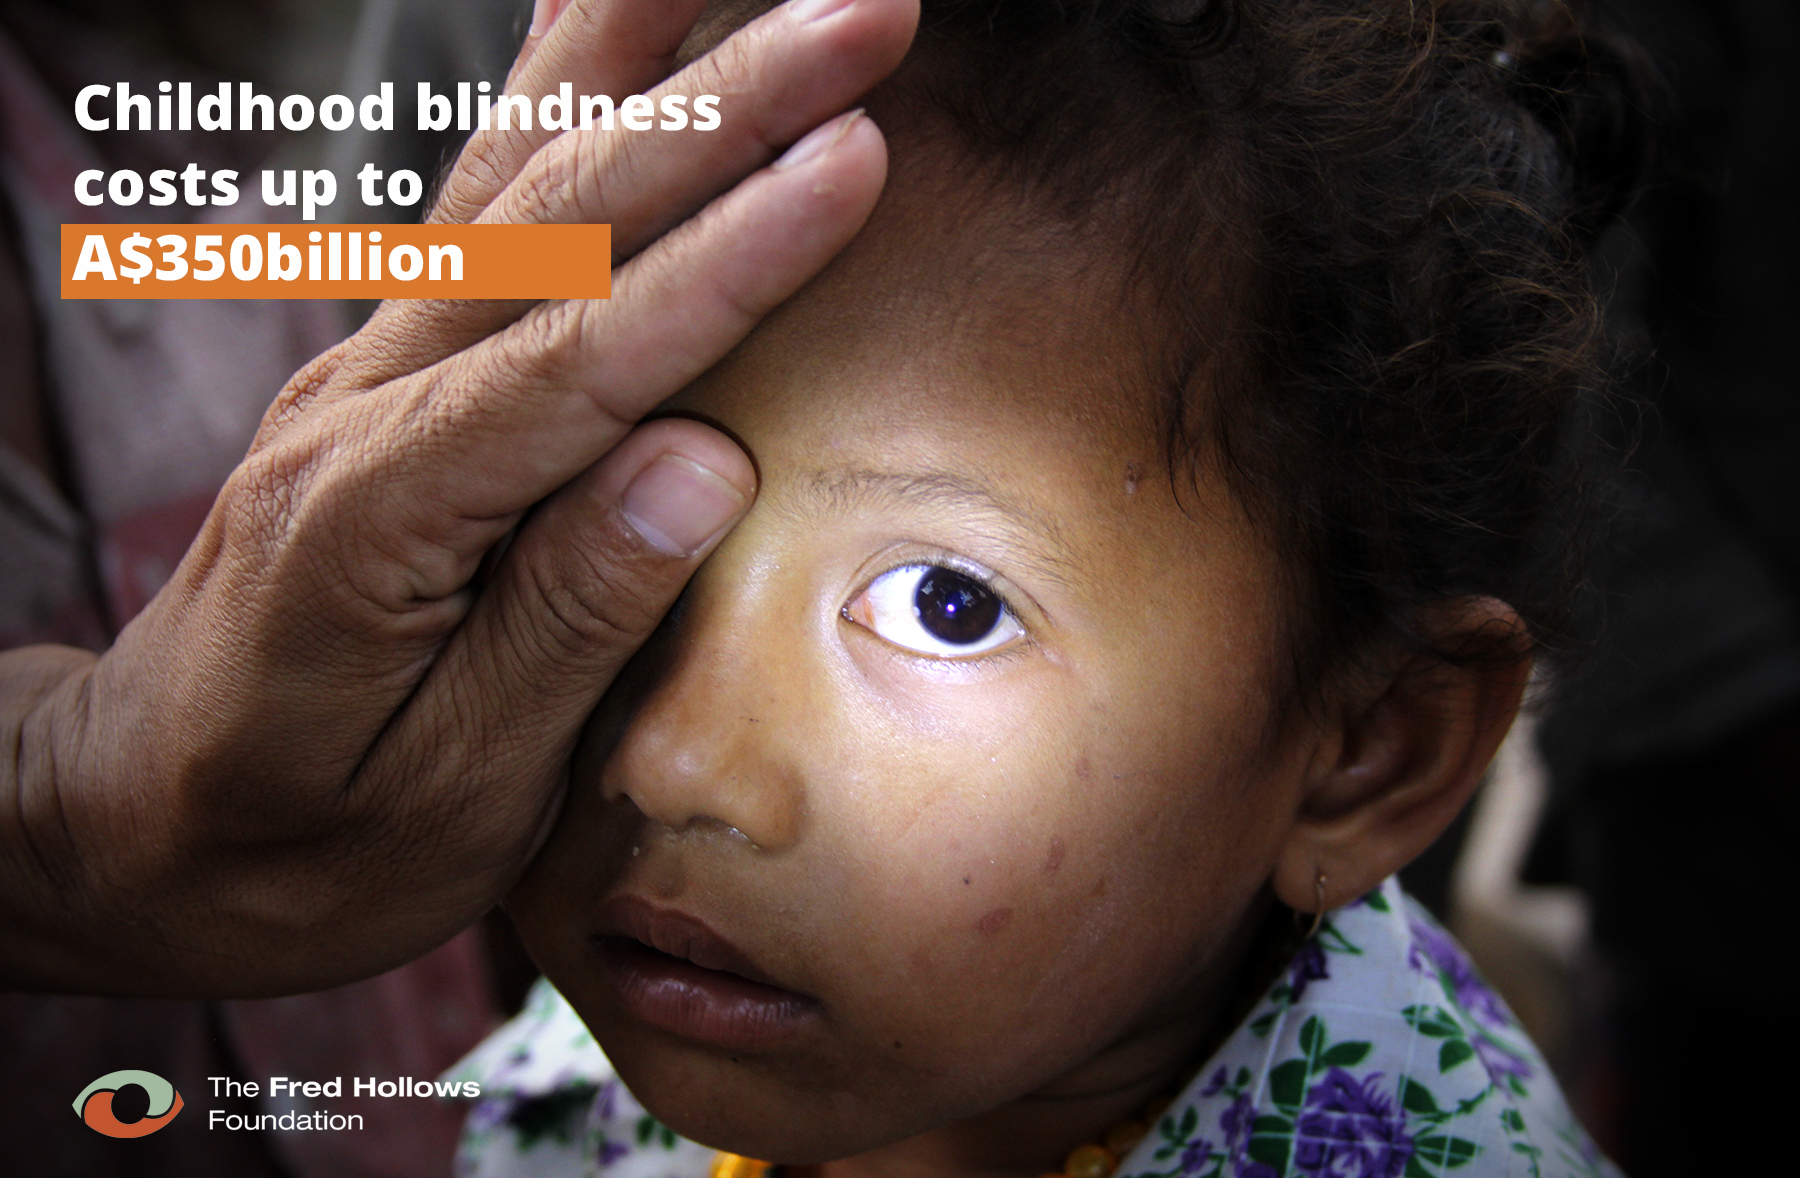 Childhood blindness costs up to $350 billion